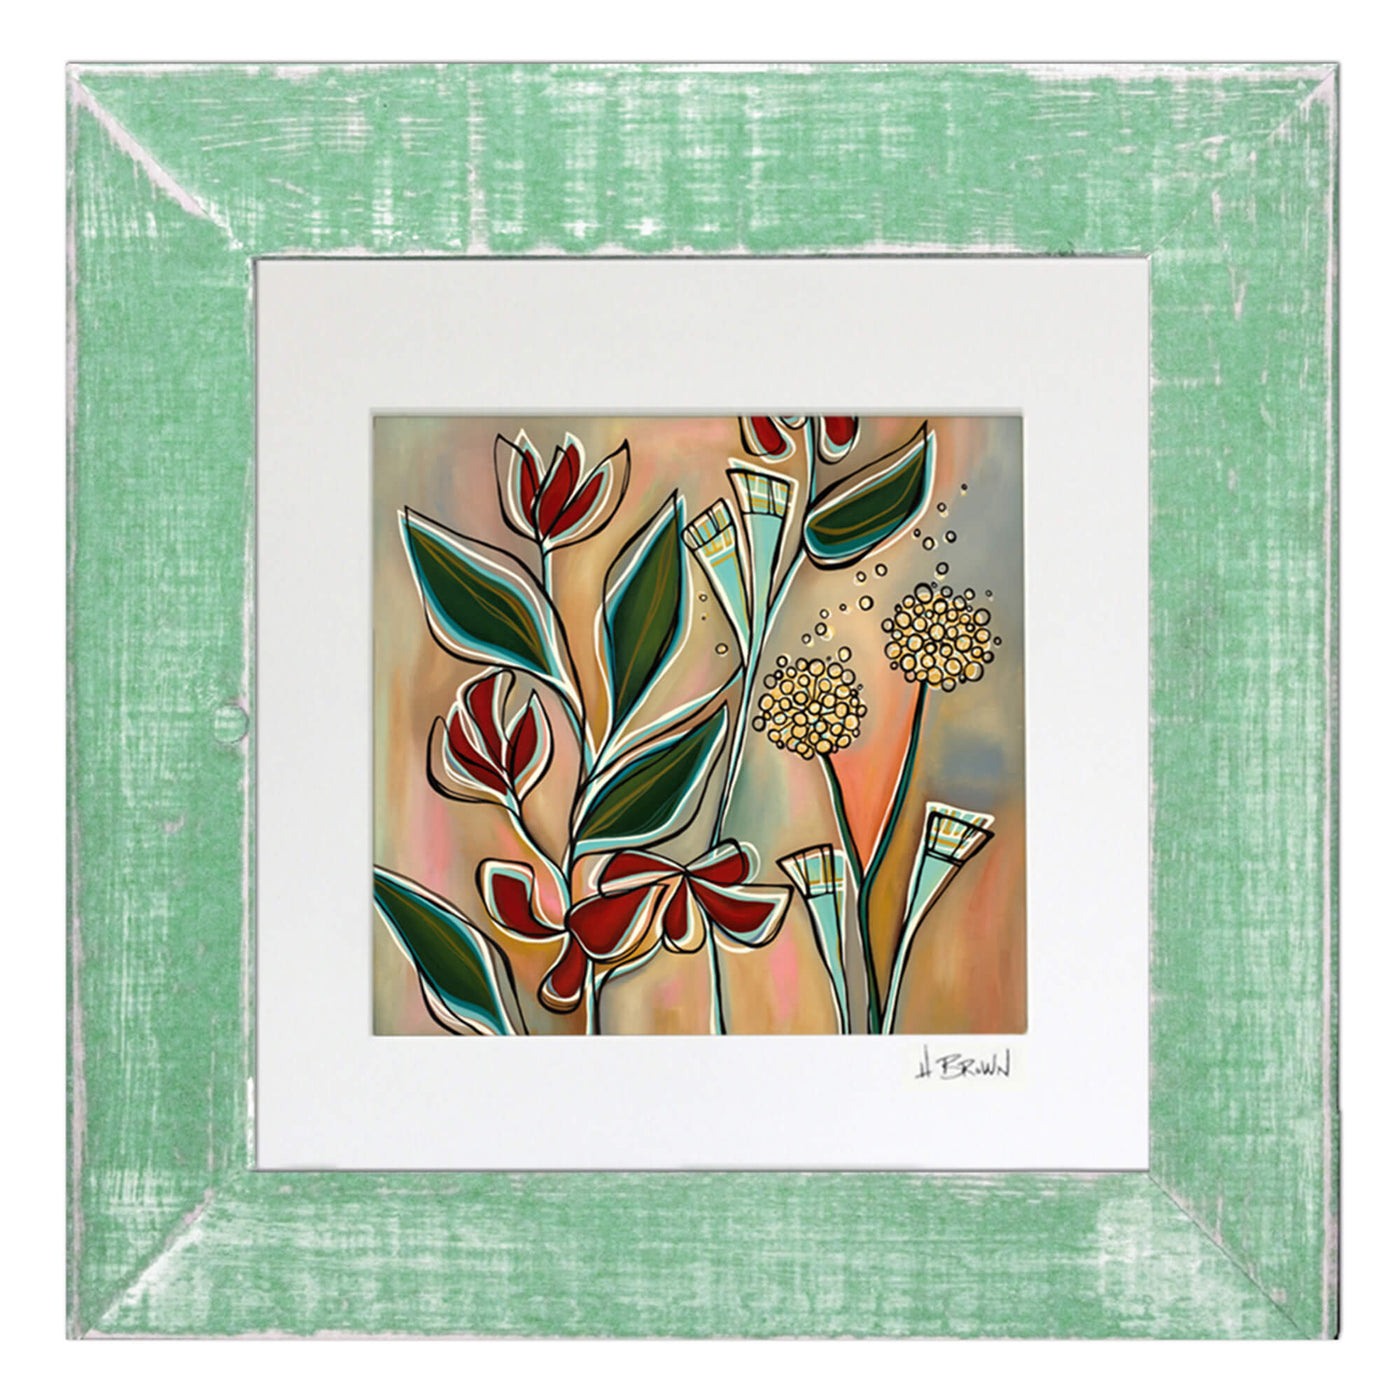 Red heliconia and yellow tropical flowers in mat with classic green frame by Hawaii artist Heather Brown